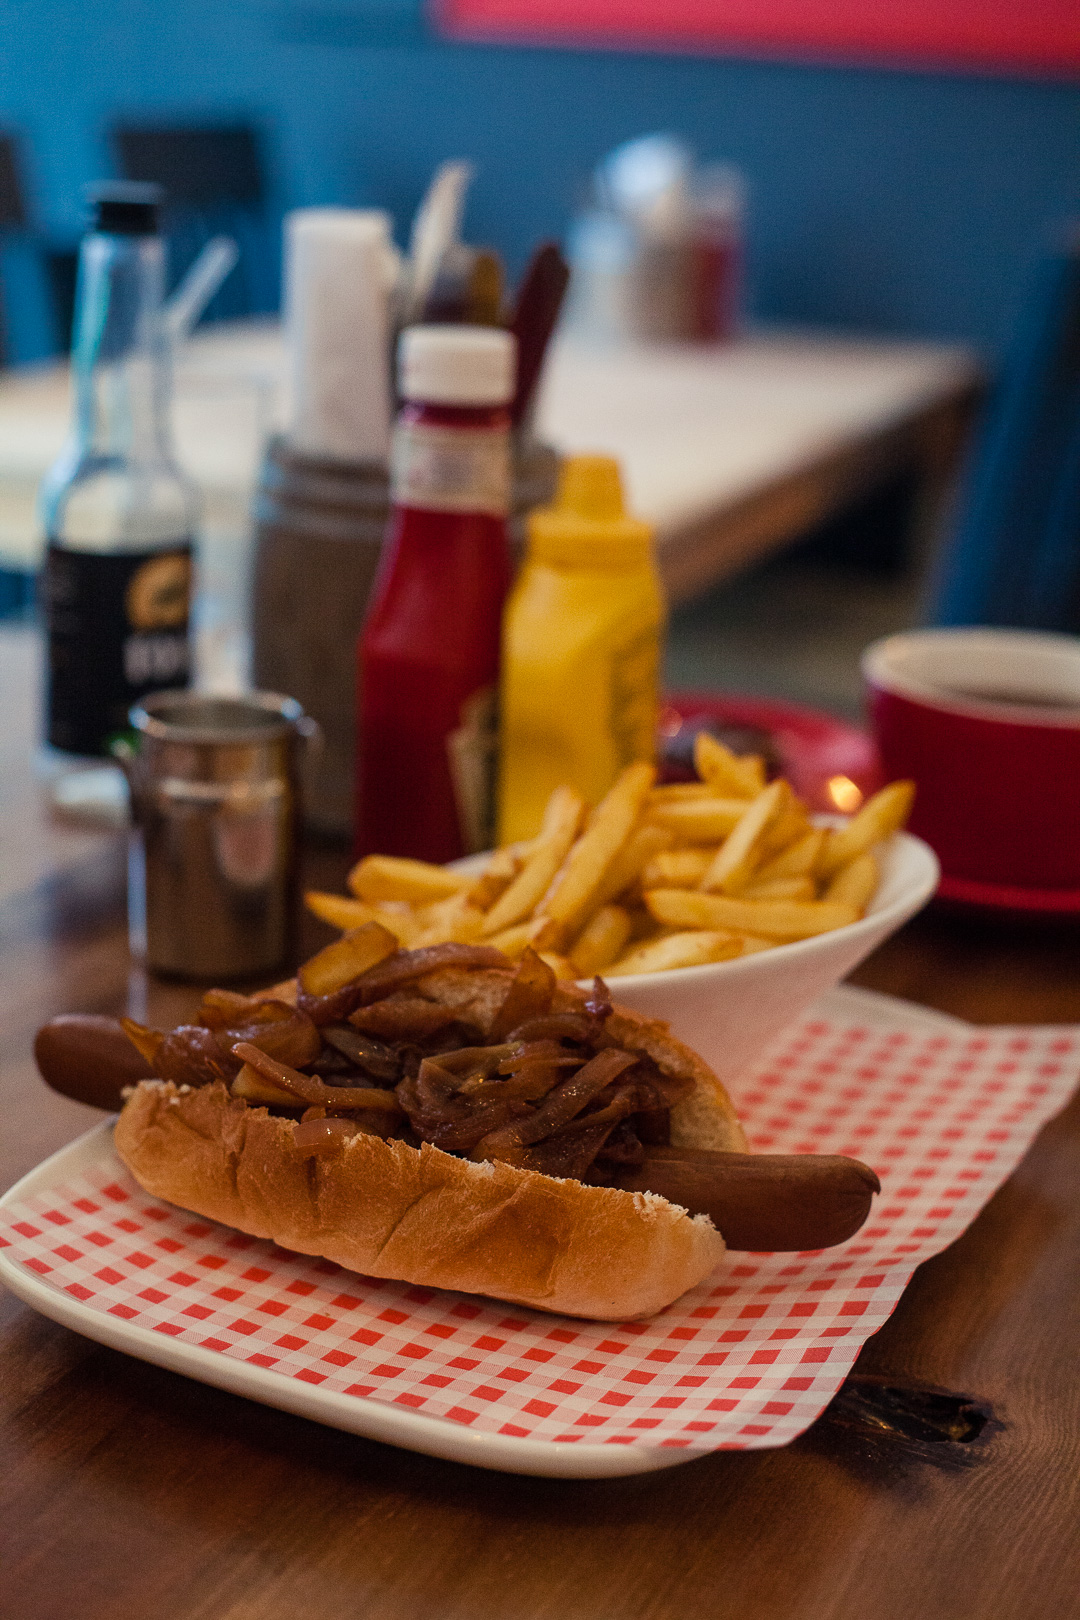 Surf Dogs Glasgow is a new hotdog joint in the Southside of Glasgow. Decorated with an eclectic mix of Star Wars memorabilia, skate boards and film quotes, the restaurant dishes up a variety of hot dogs, many of which can be easily made vegan!